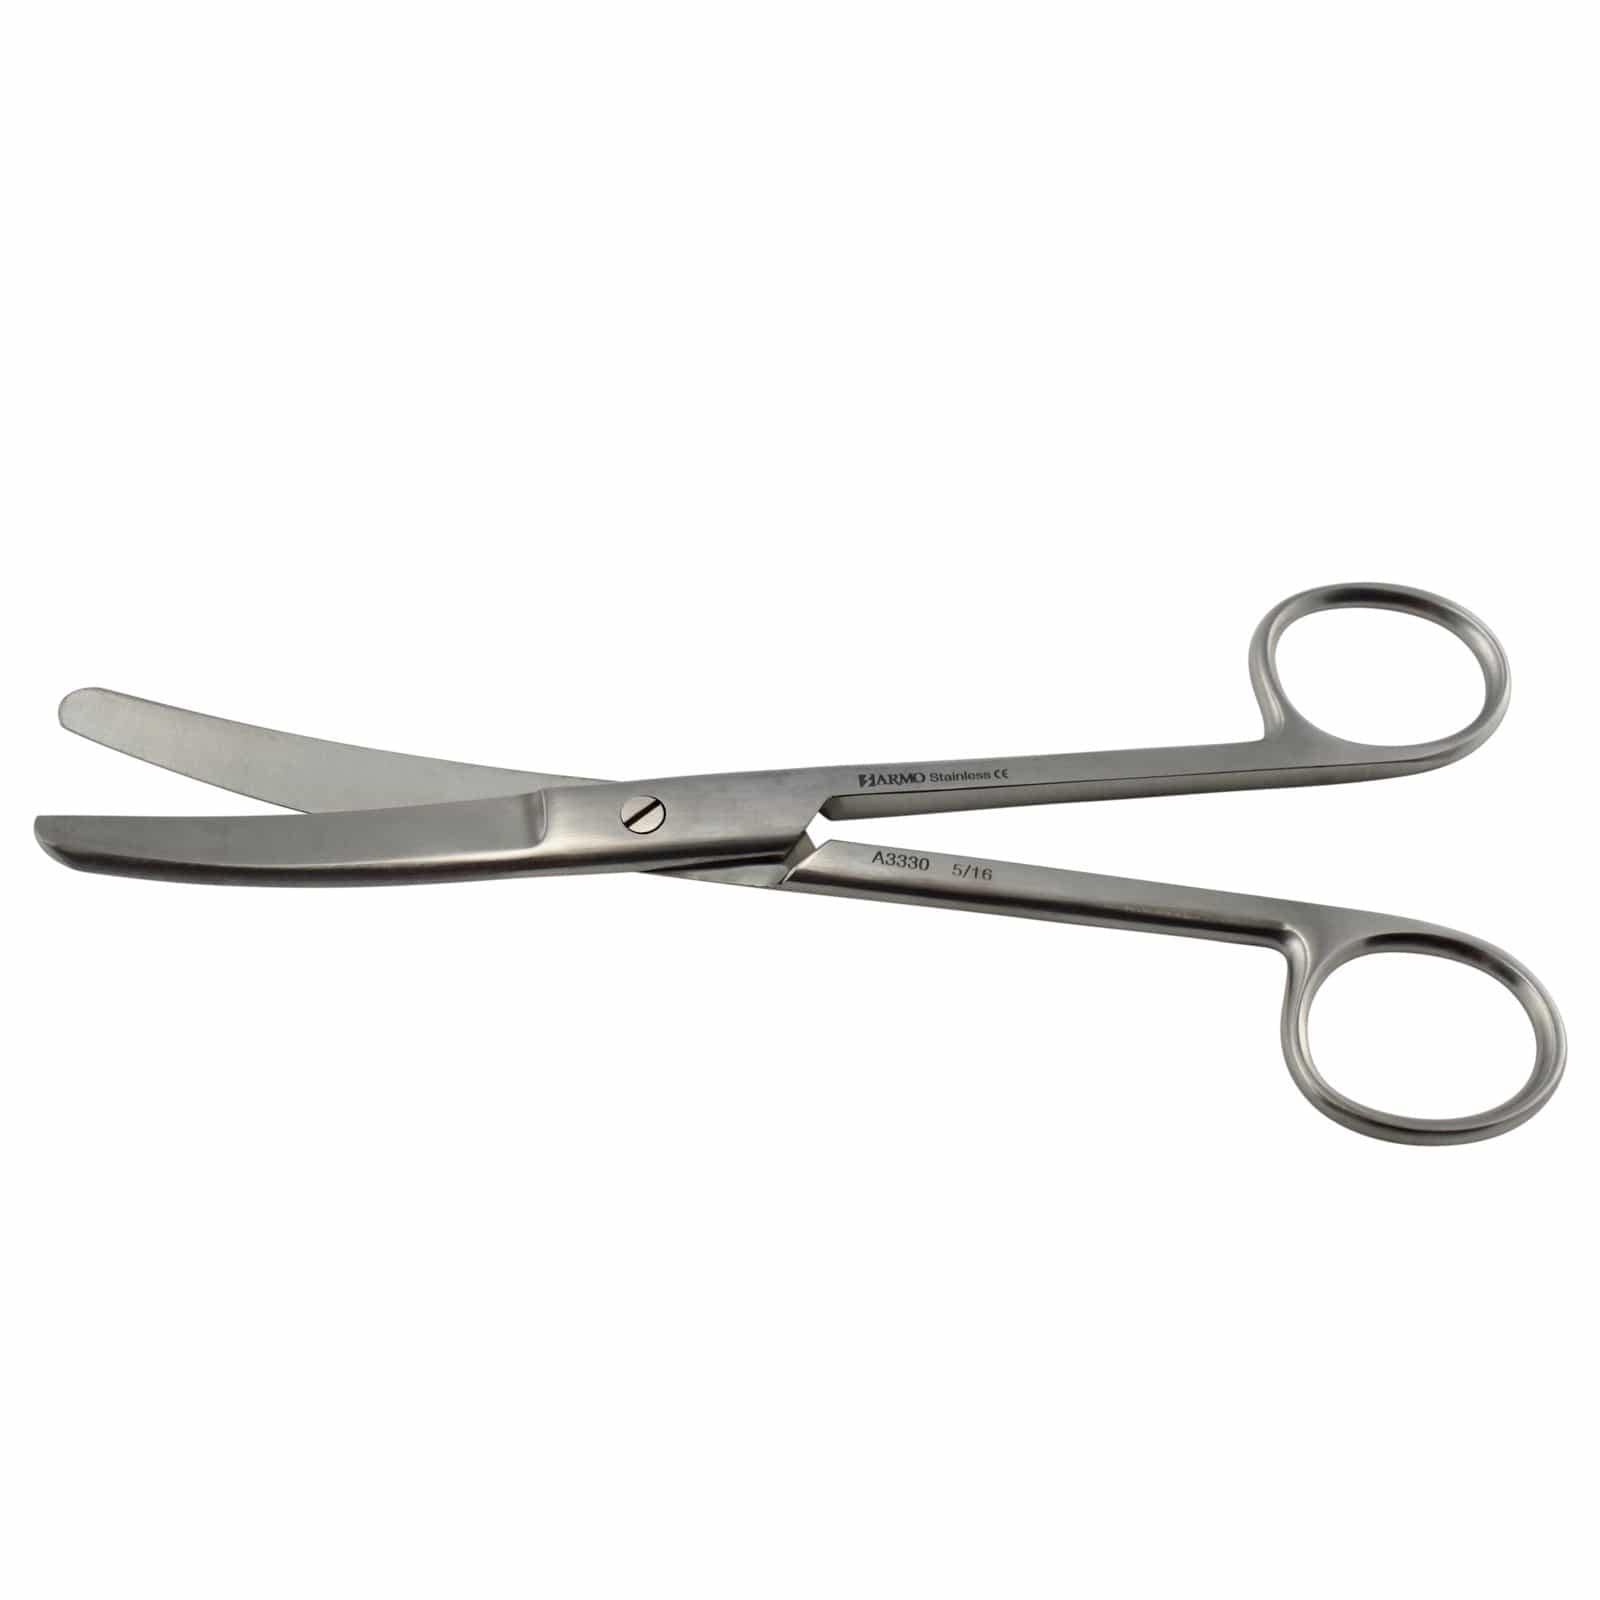 Armo Surgical Instruments 18cm / Curved / Blunt/Blunt Armo Surgical Scissors